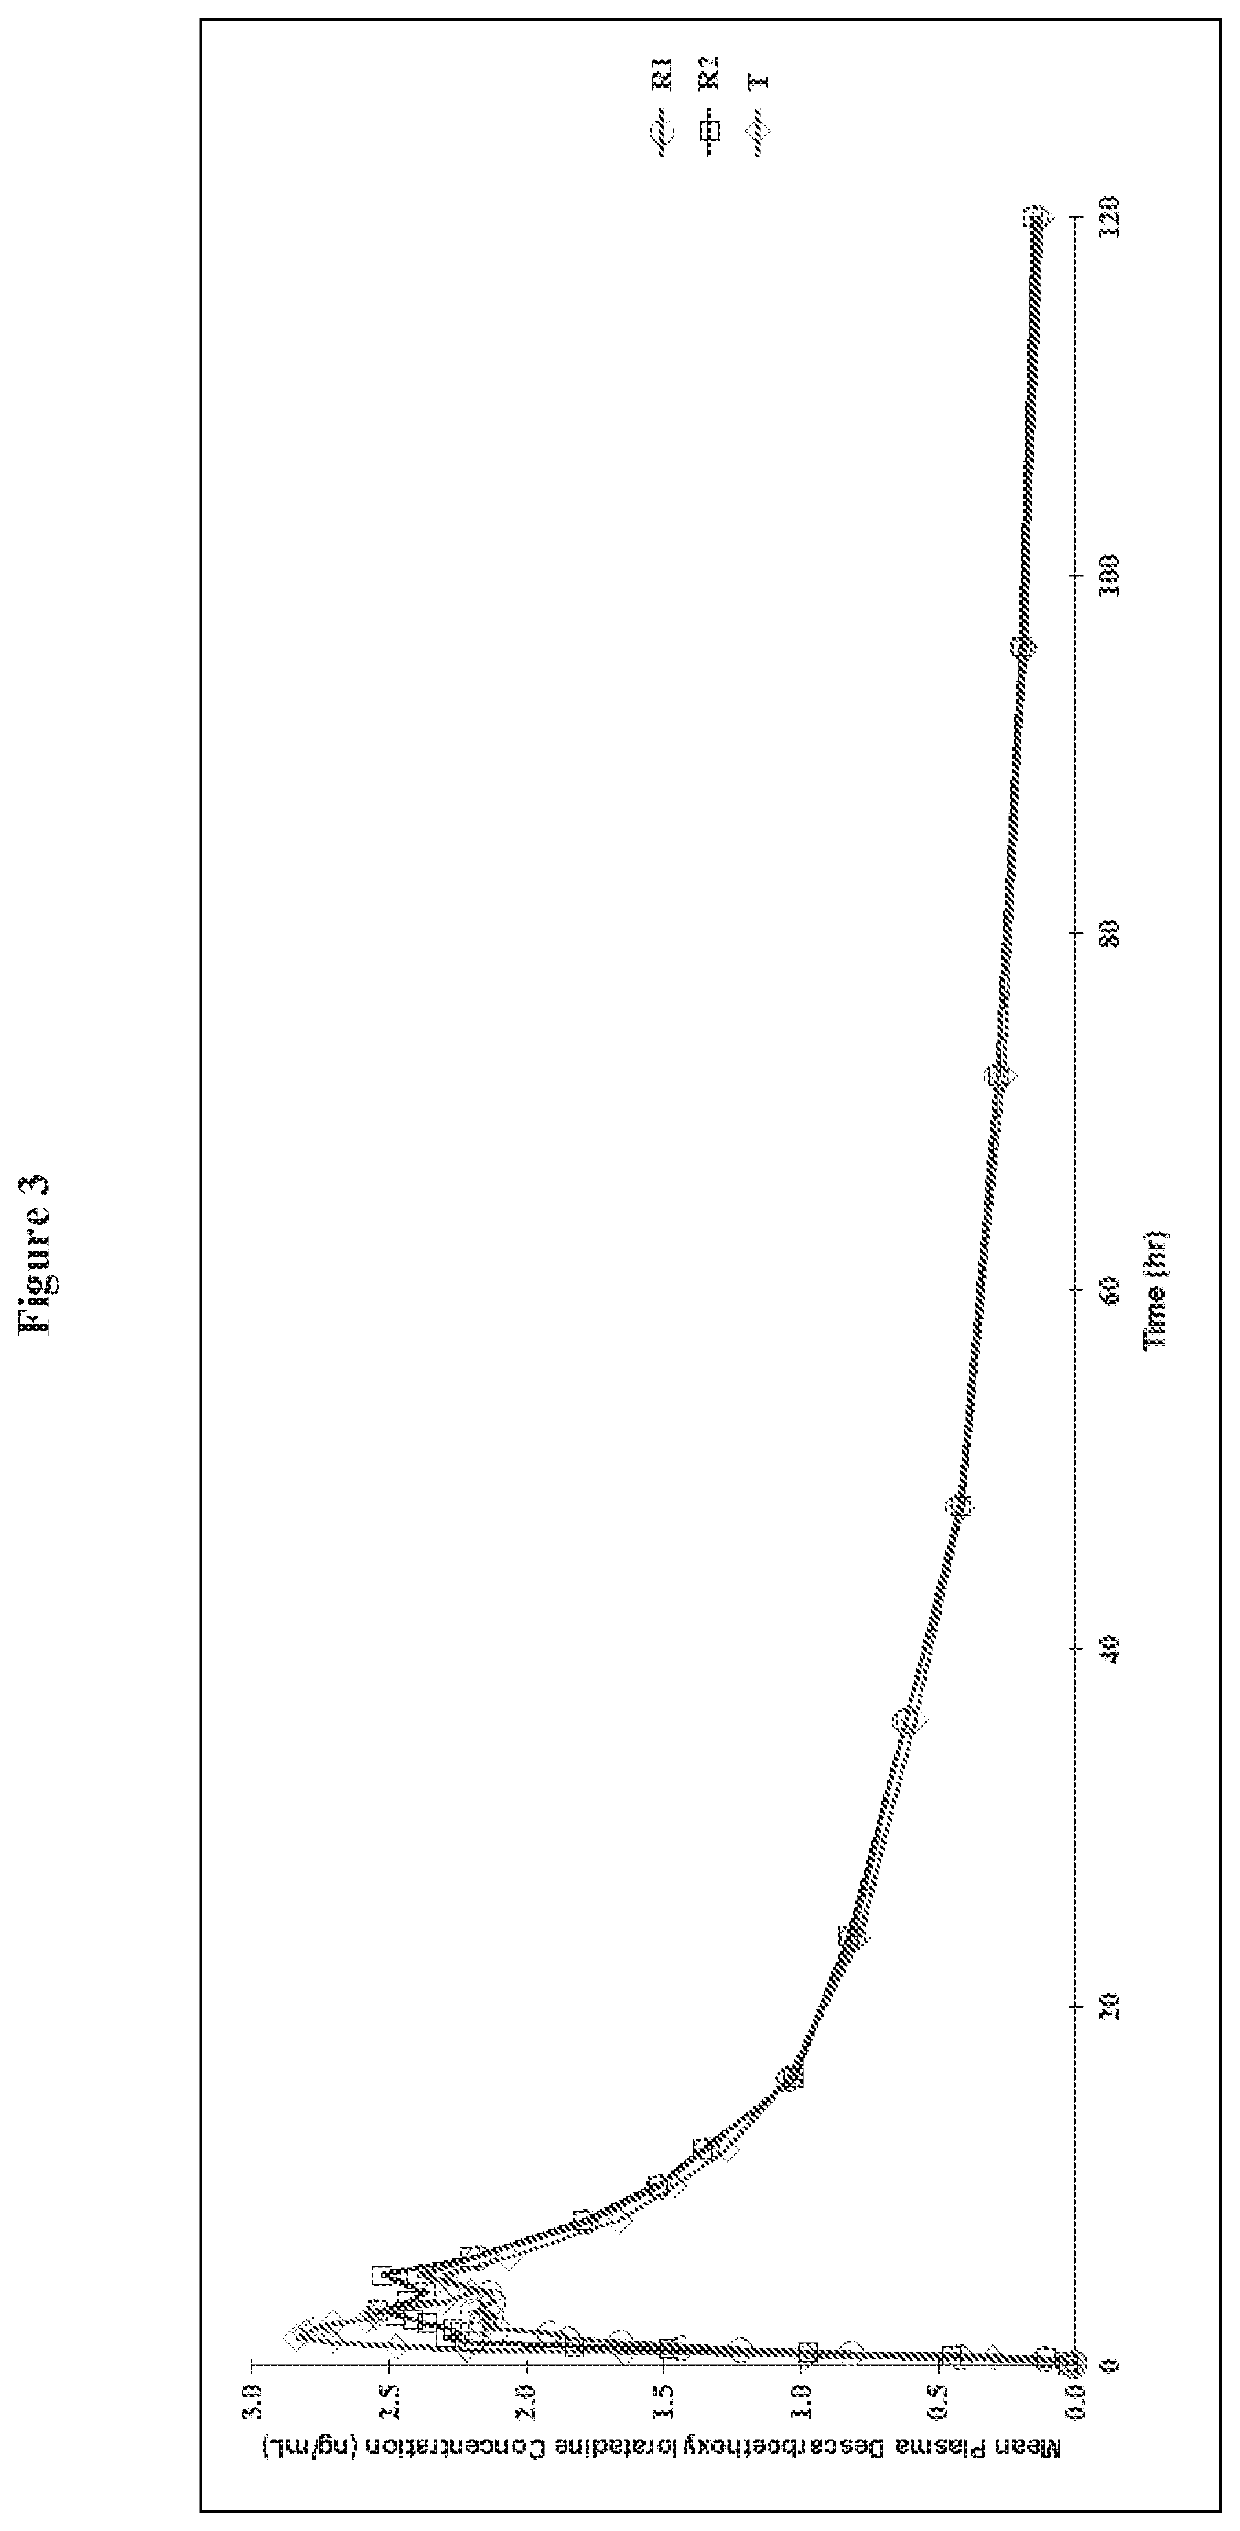 Chewable gel dosage form and associated methods